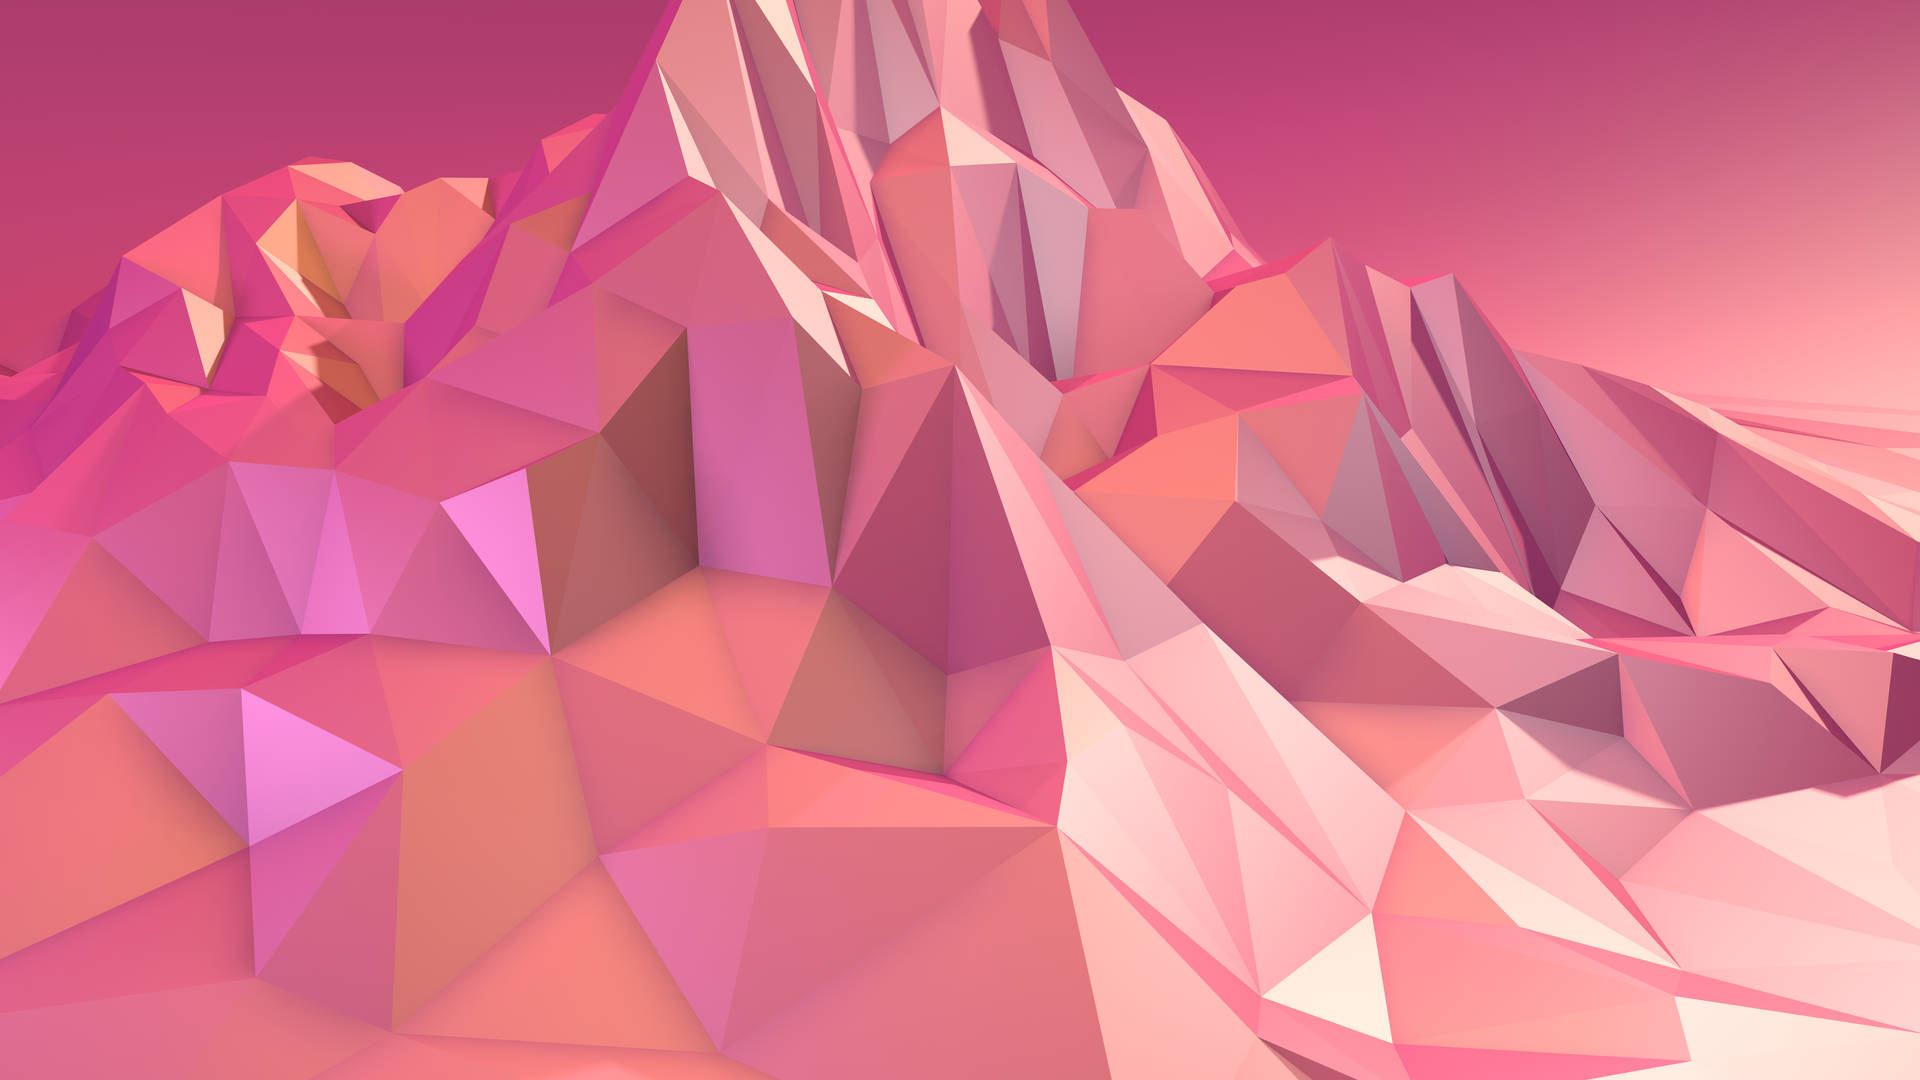 Light Pink Aesthetic Abstract Mountain Background